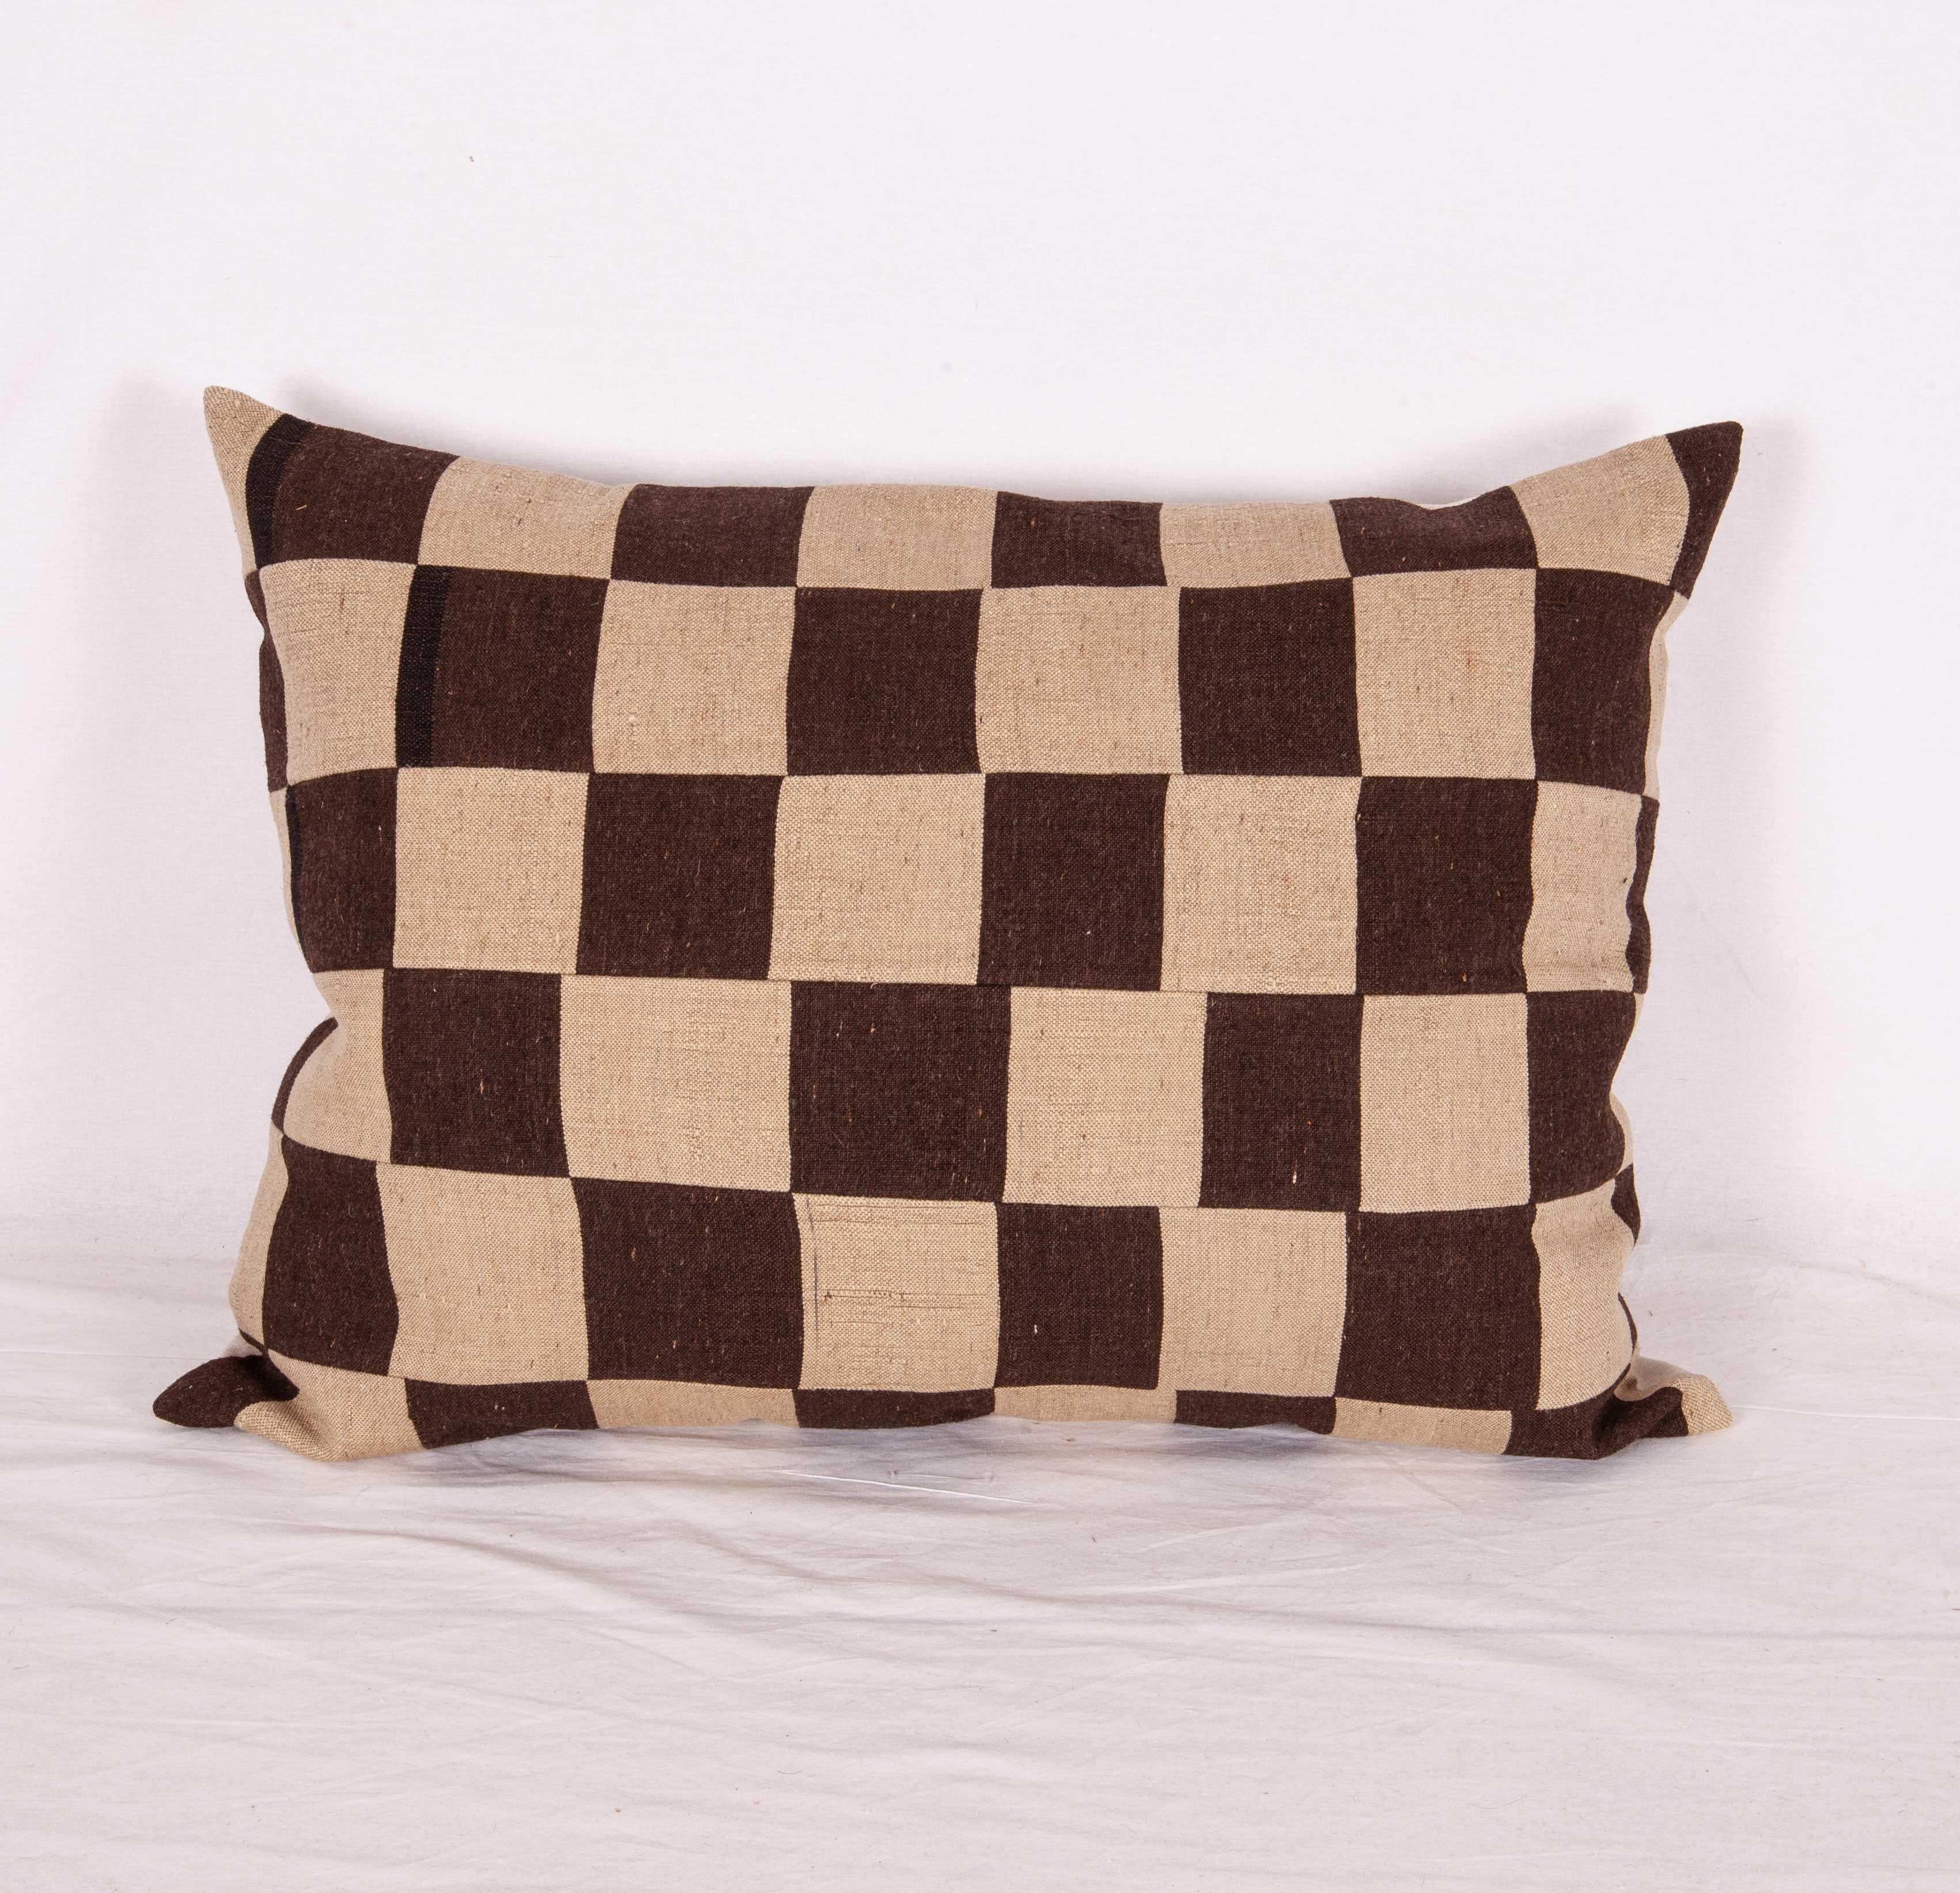 Hand-Woven Kilim Pillow Cases Fashioned from a Vintage Cover, Late 20th Century